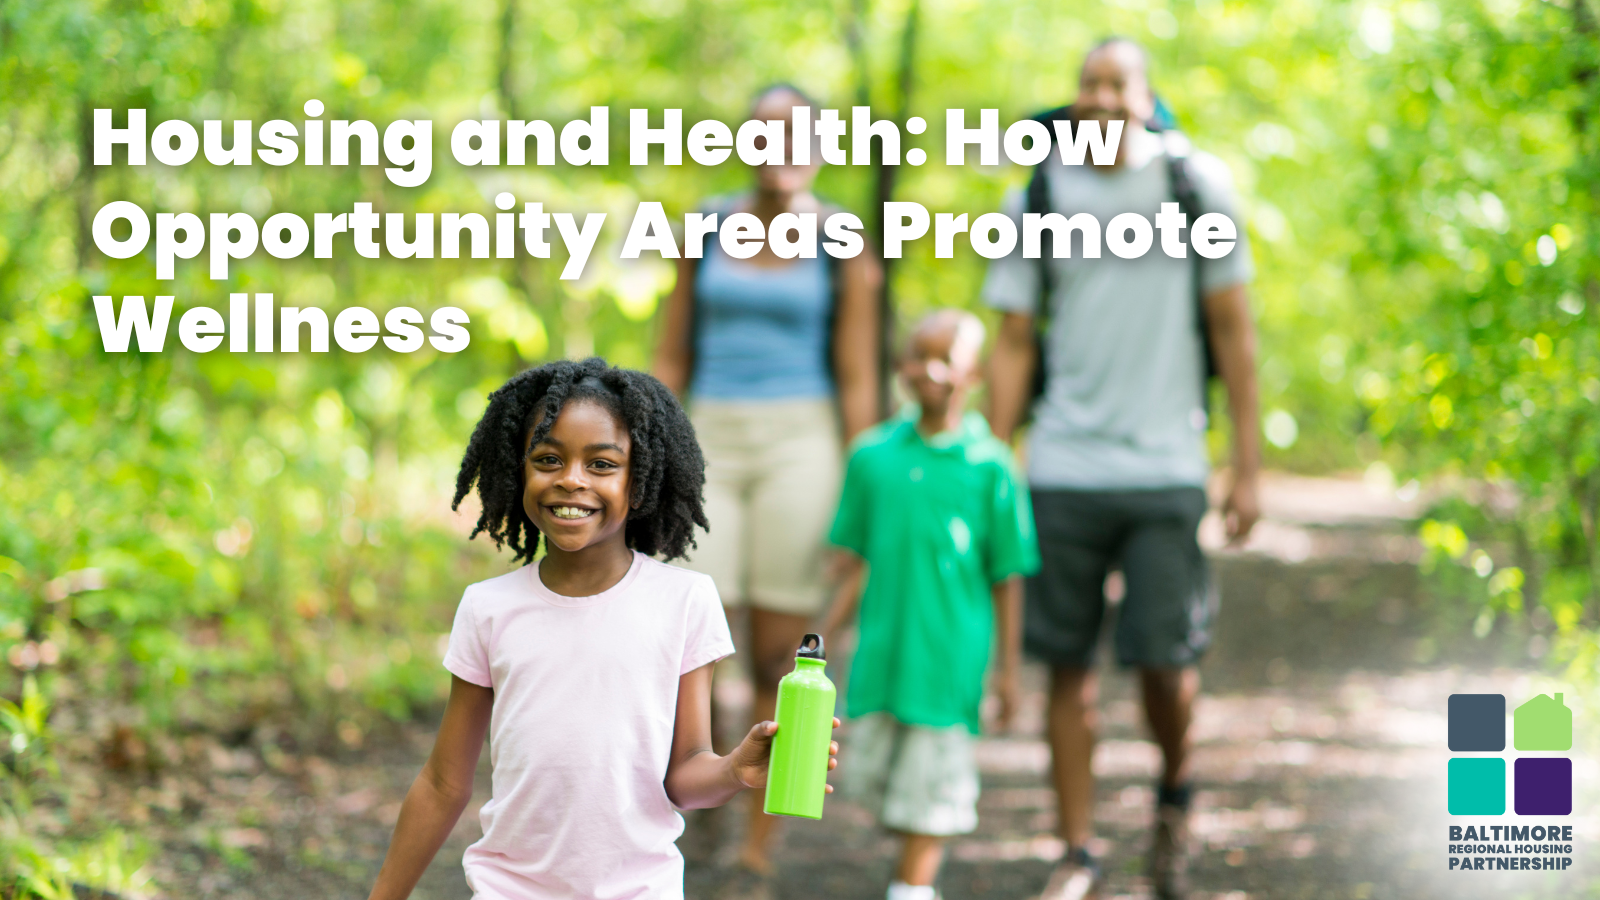 Housing and Health: How Opportunity Areas Promote Wellness